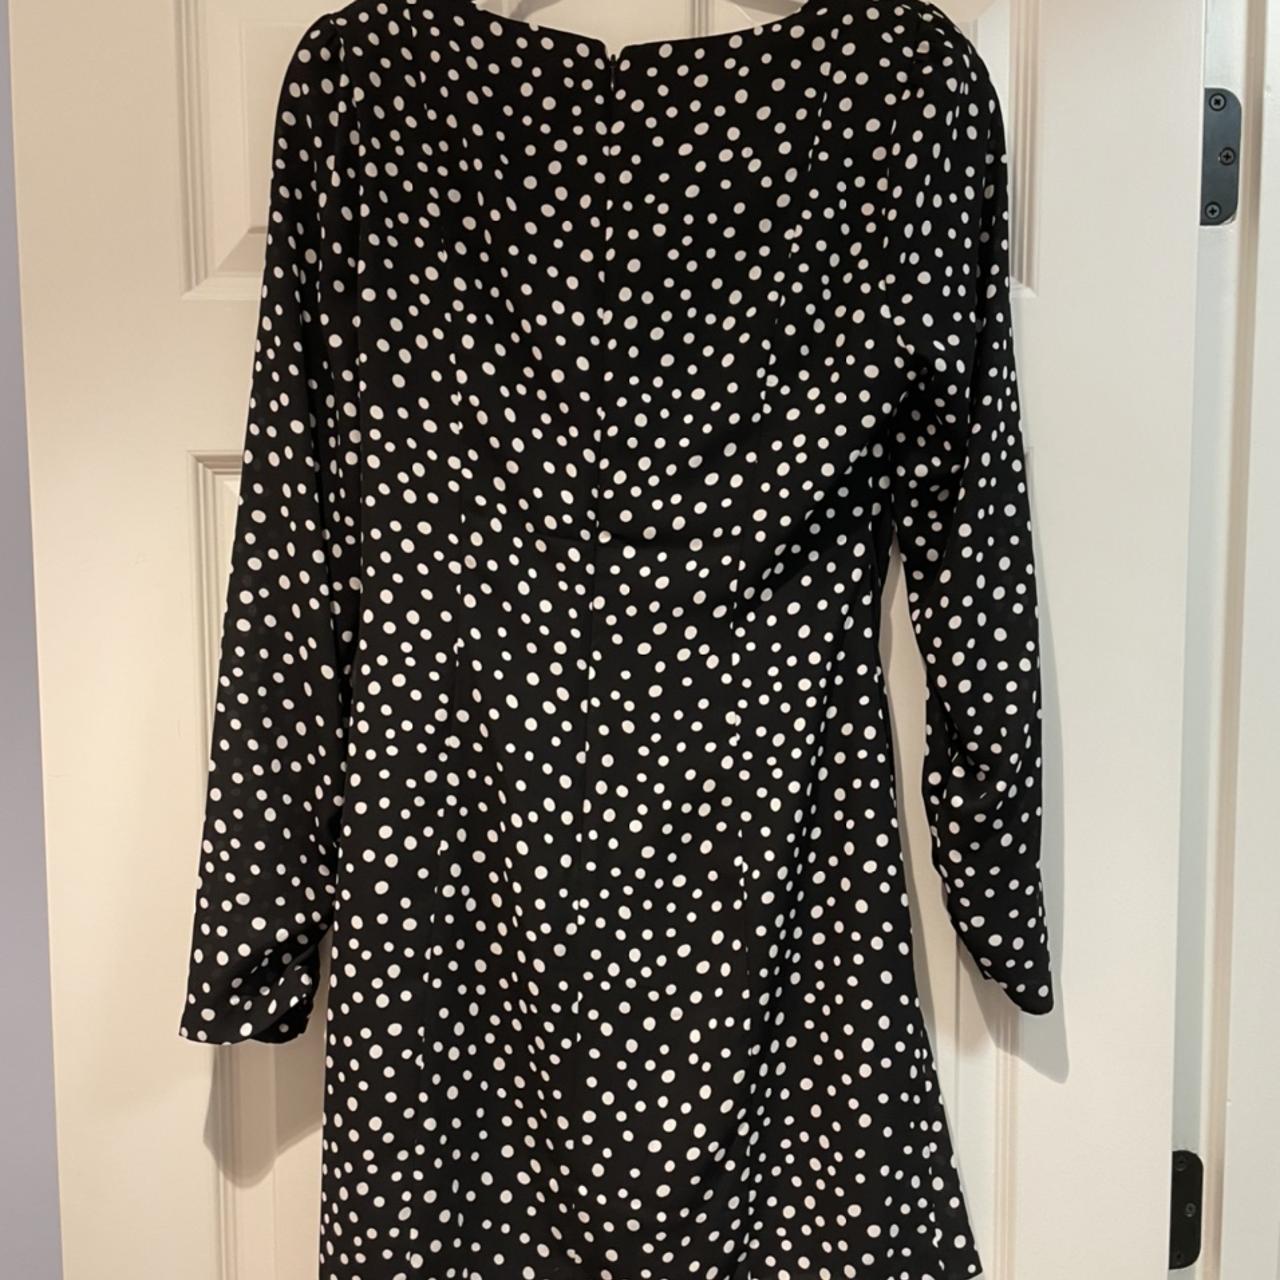 LIKELY Women's Black and White Dress (2)